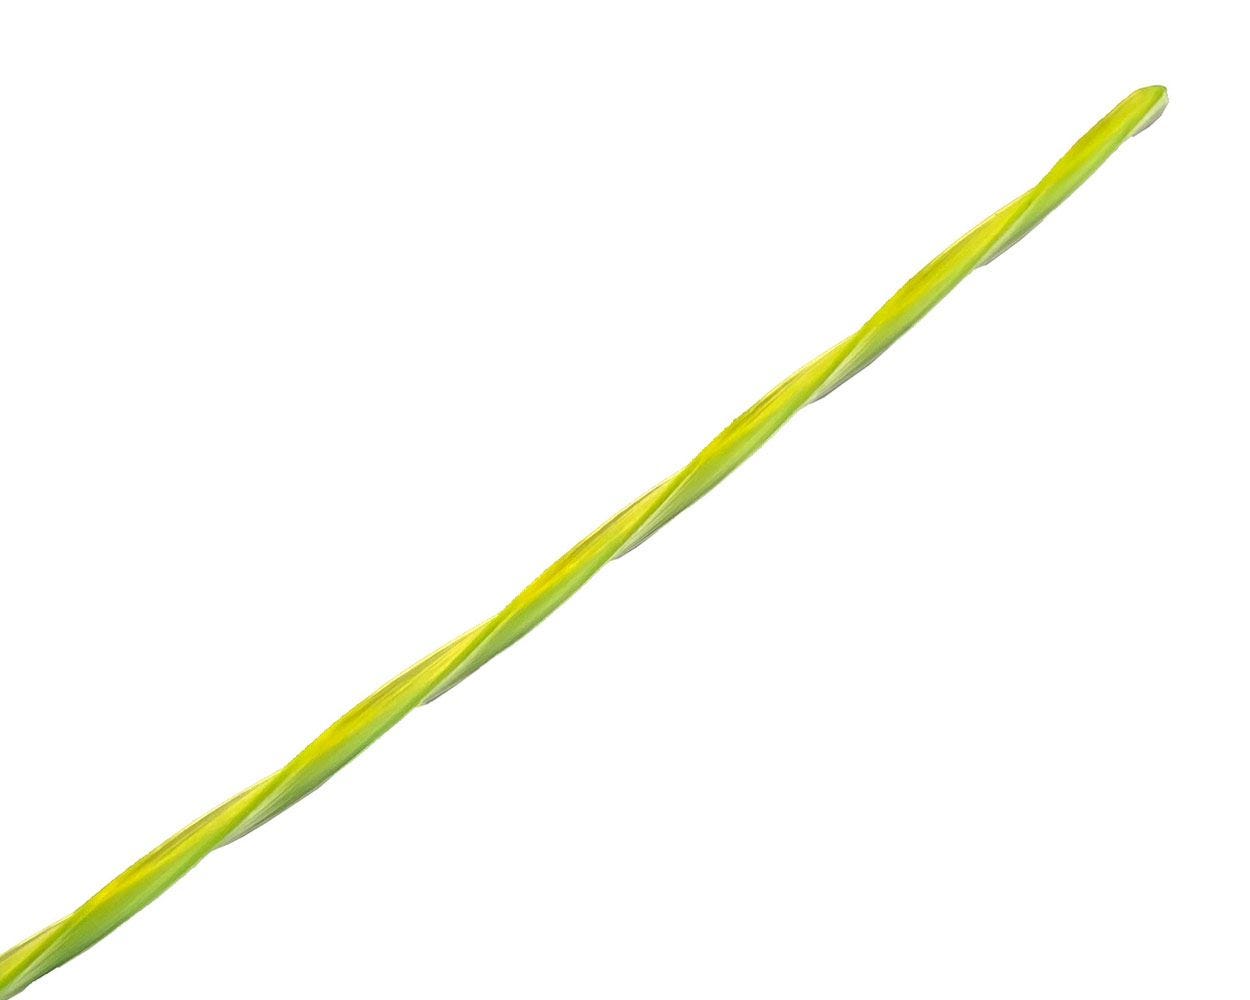 0.080-Inch Replacement String Trimmer Line (100-feet) | Greenworks